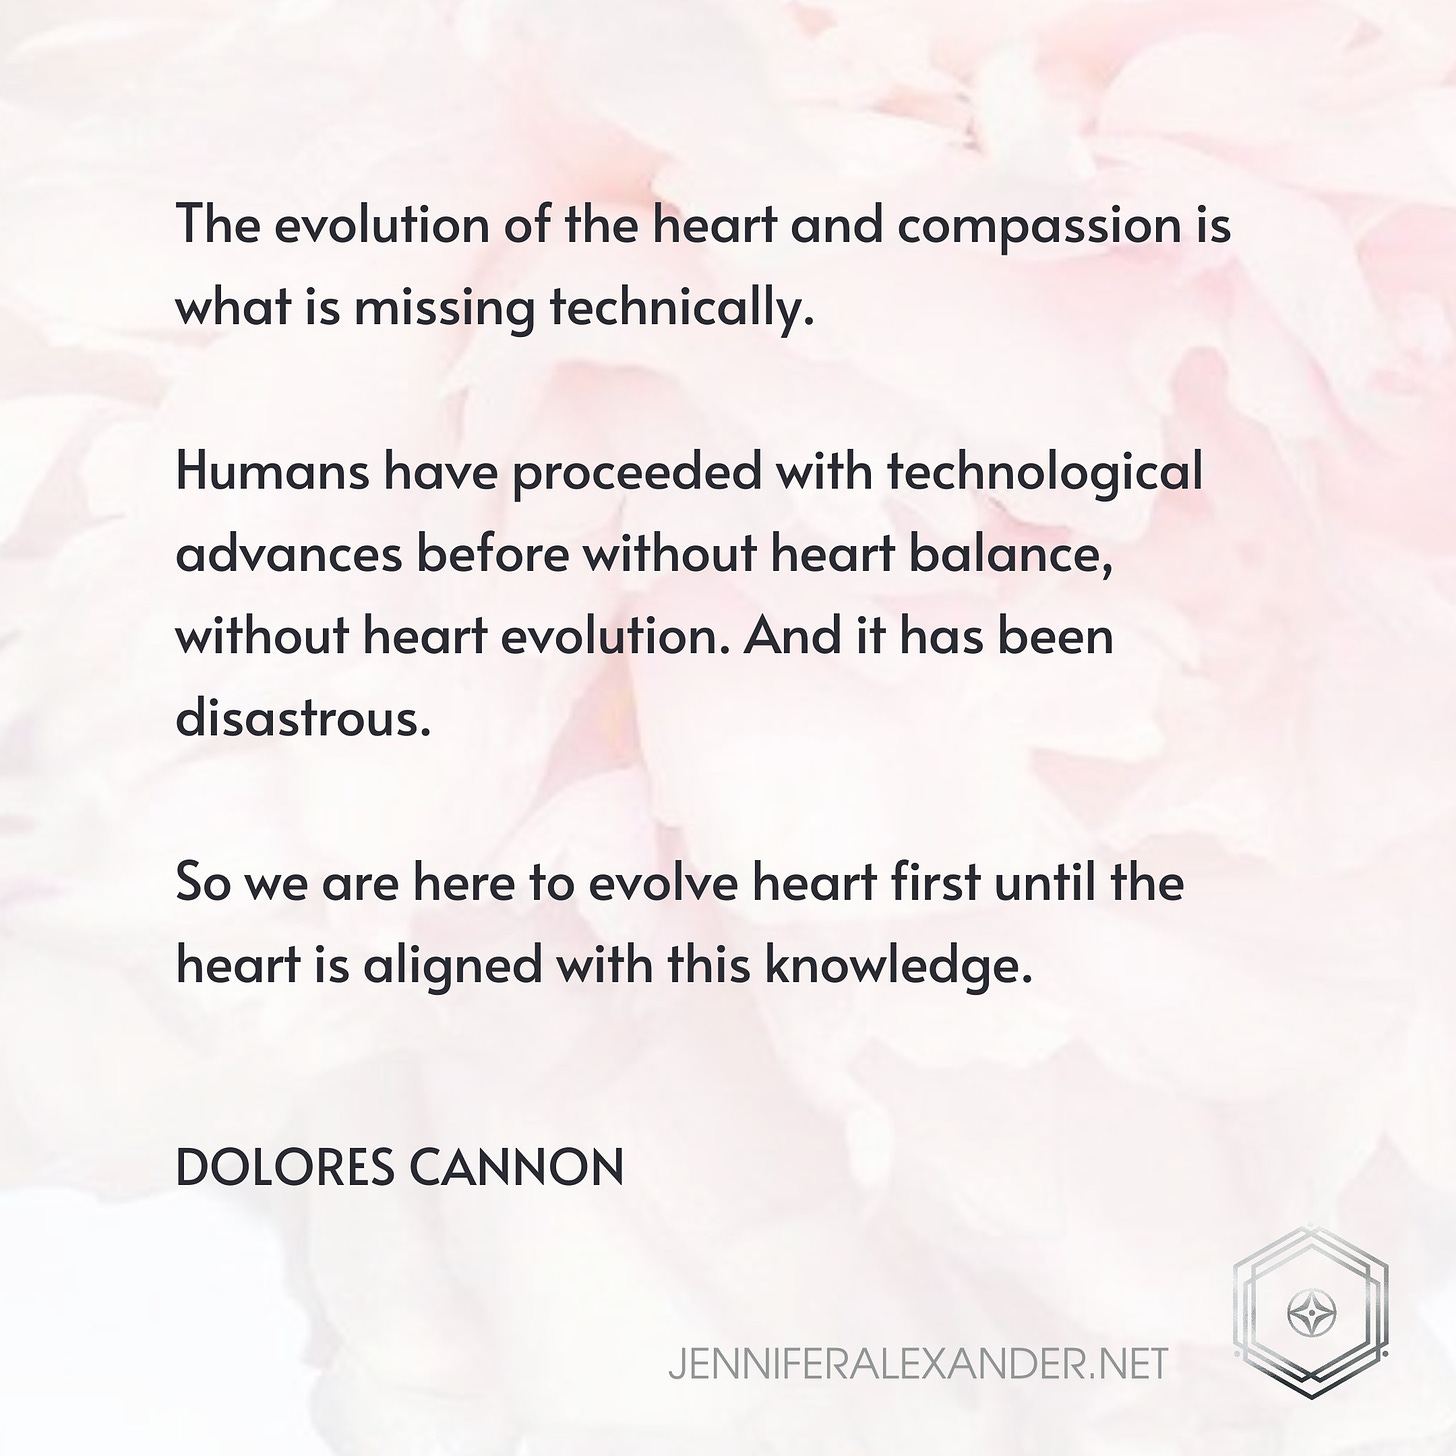 May be an image of text that says 'The evolution of the heart and compassion is what is missing technically. Humans have proceeded with technological advances before without heart balance, without heart evolution. And it has been disastrous. So we are here to evolve heart first until the heart is aligned with this knowledge. DOLORES CANNON JENNIFERALEXANDER.NET'